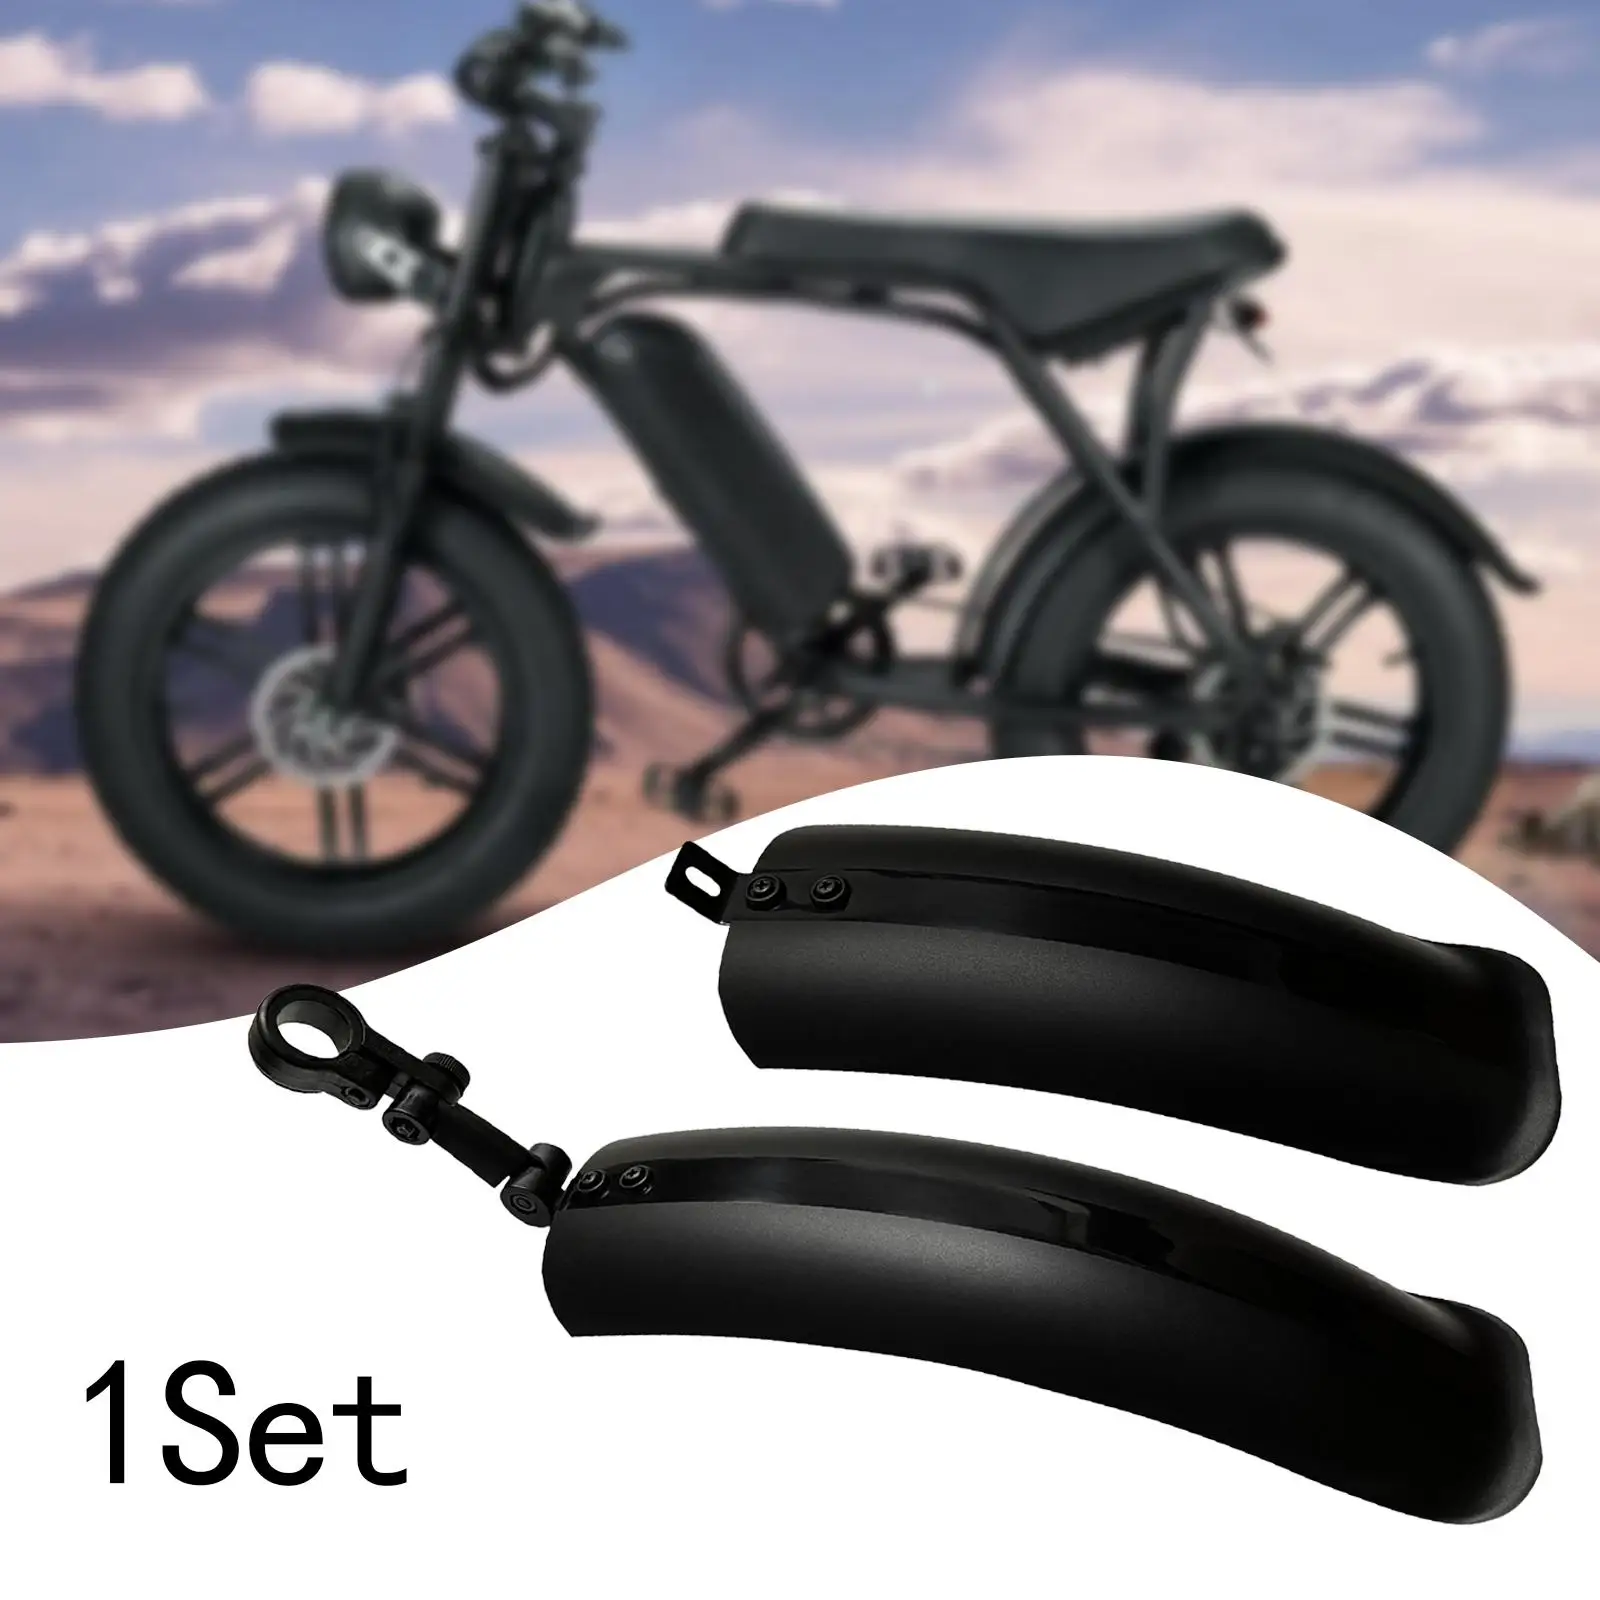 Bike Mudguard Front Rear Set Easy to Install Spare Parts Accs Mud Guard for Beach Bikes Mountain Bike Snow Bikes Outdoor Riding